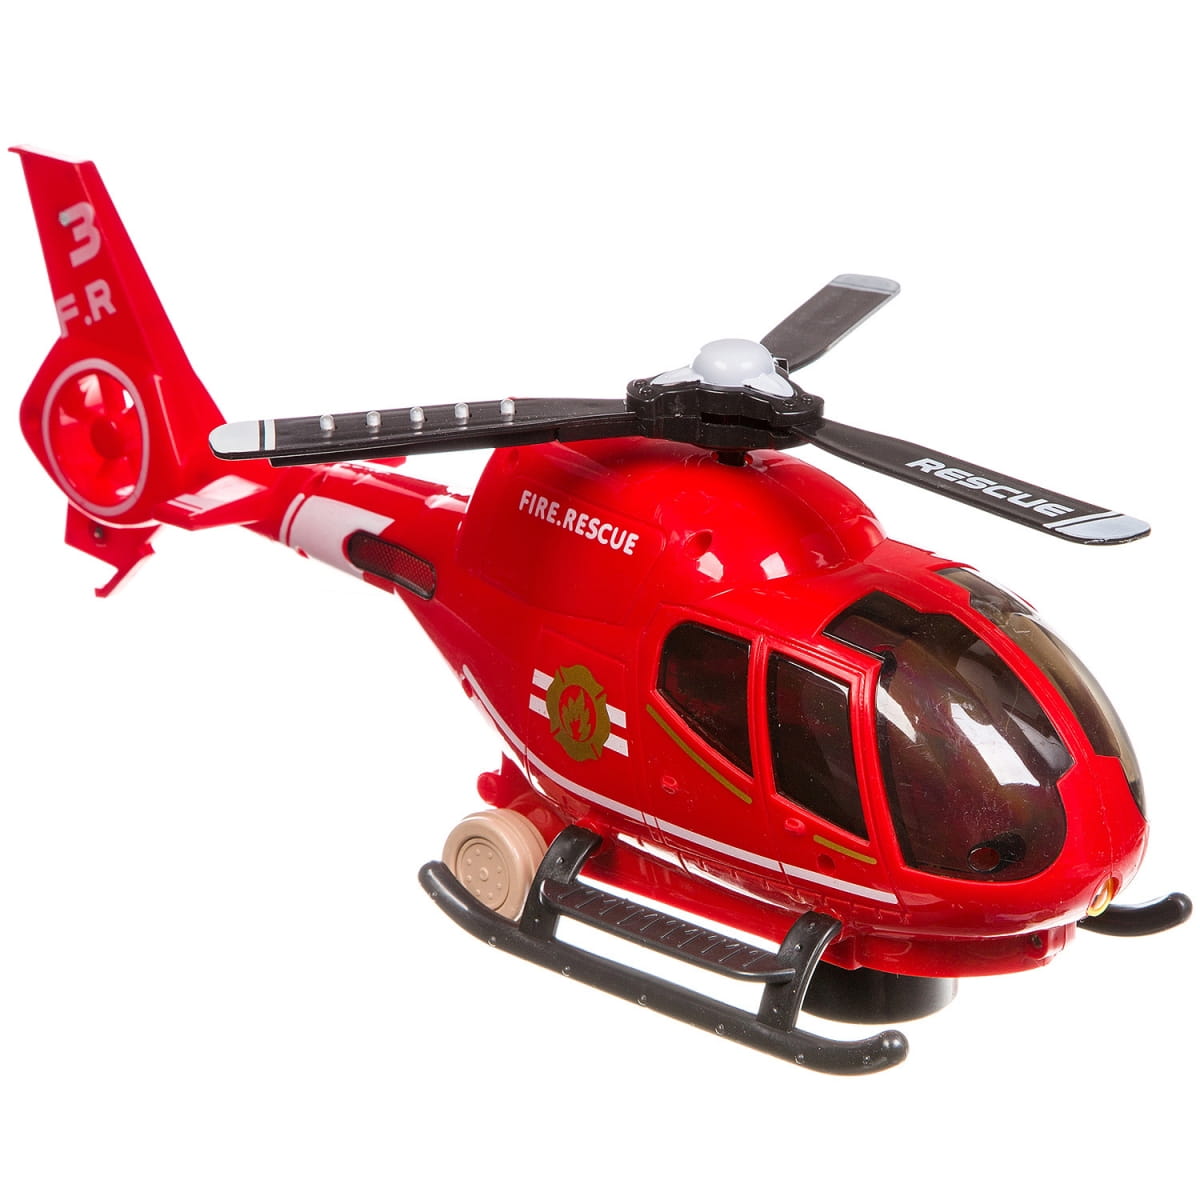    Shenzhen Toys Special Helicopter